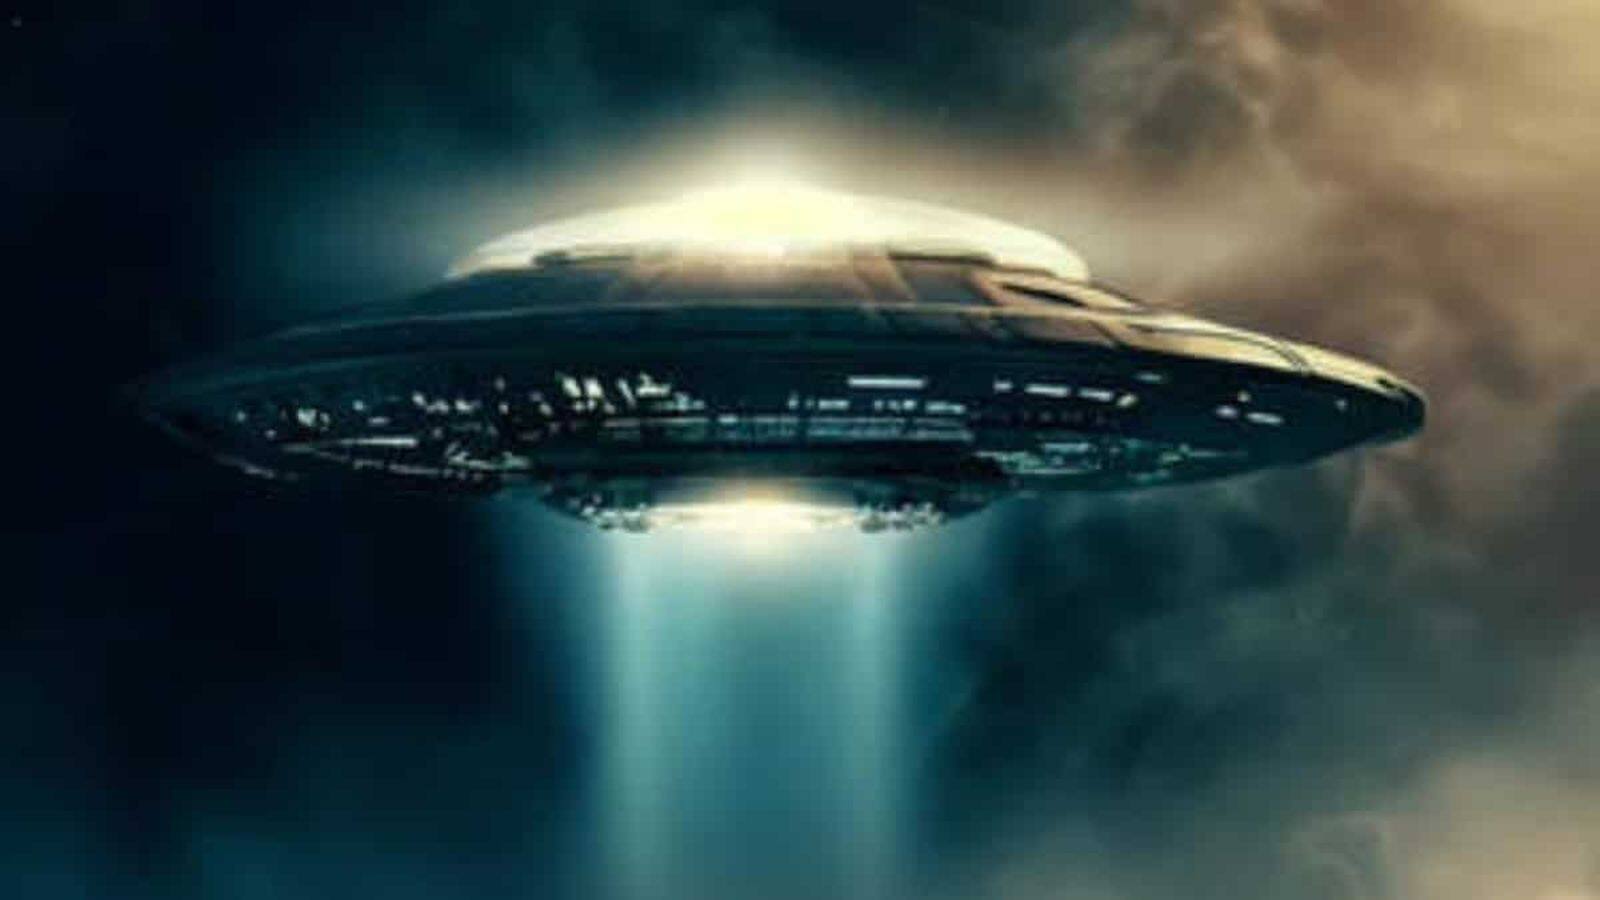 Japan's lawmakers form cross-party group to investigate UFO phenomena